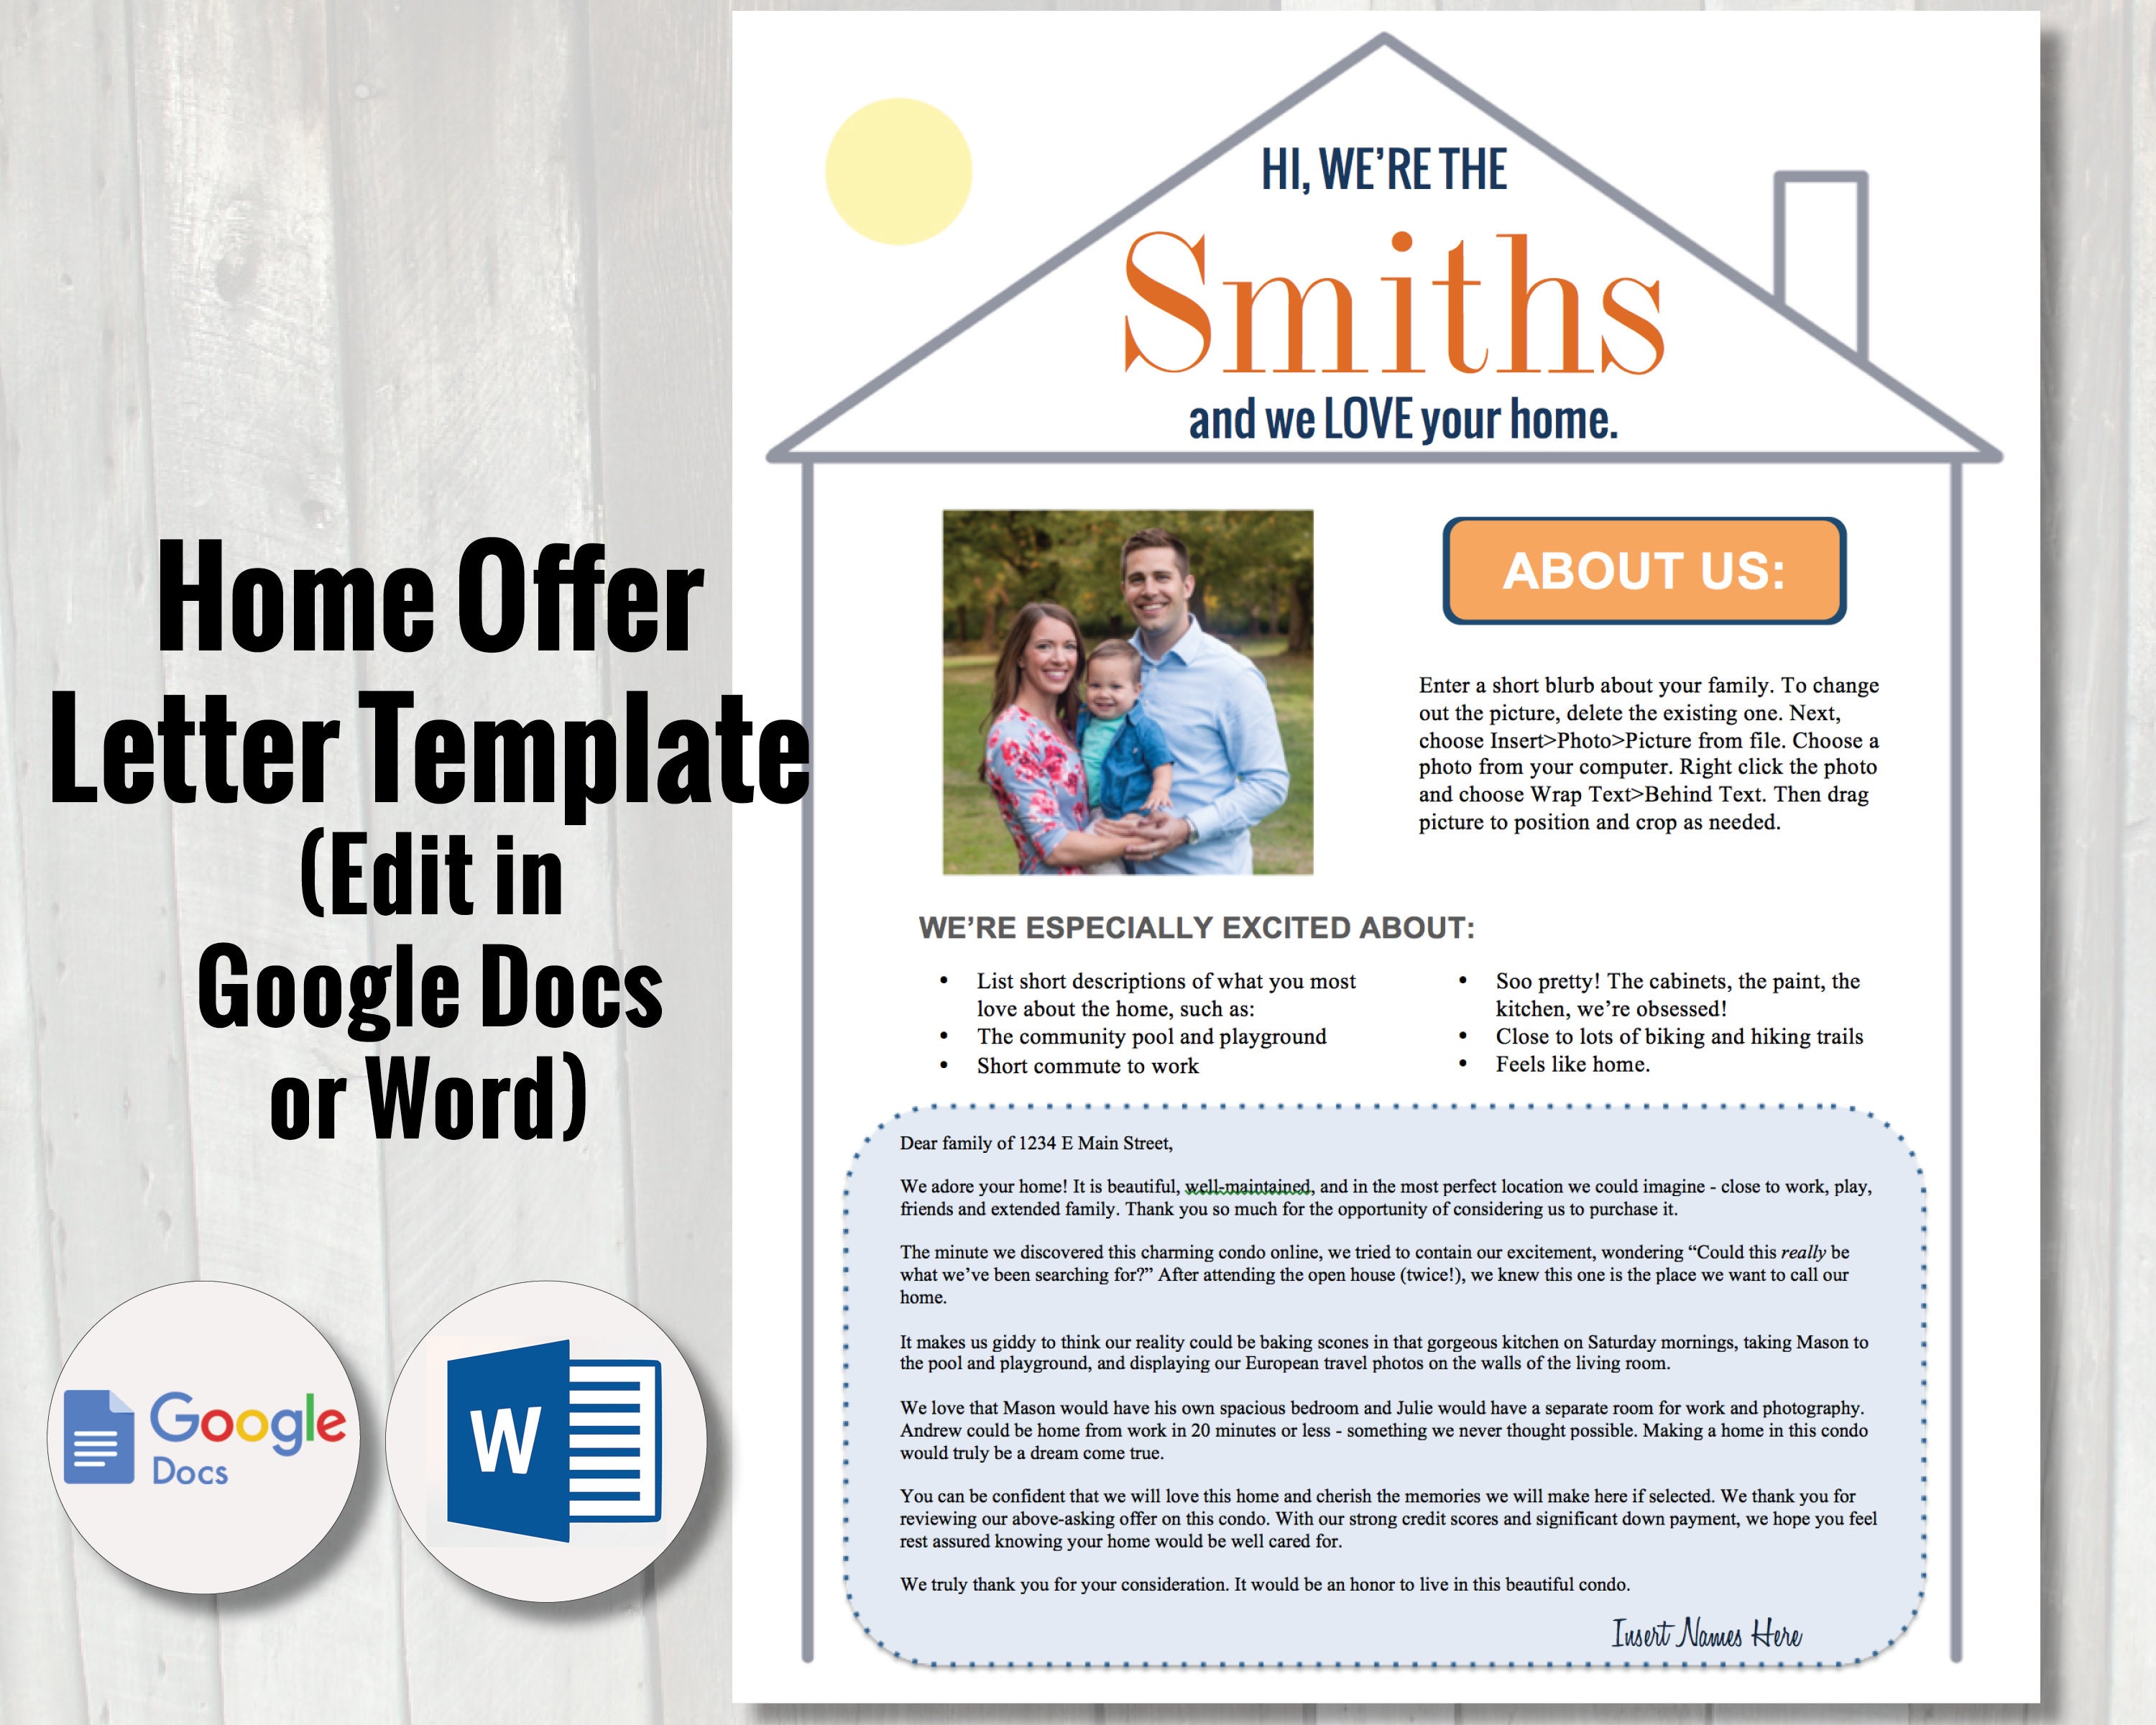 Home Offer Letter Template  Google Doc / Word Editable Letter to Seller   cover letter  House buying offer letter  Rental application With Home Offer Letter Template